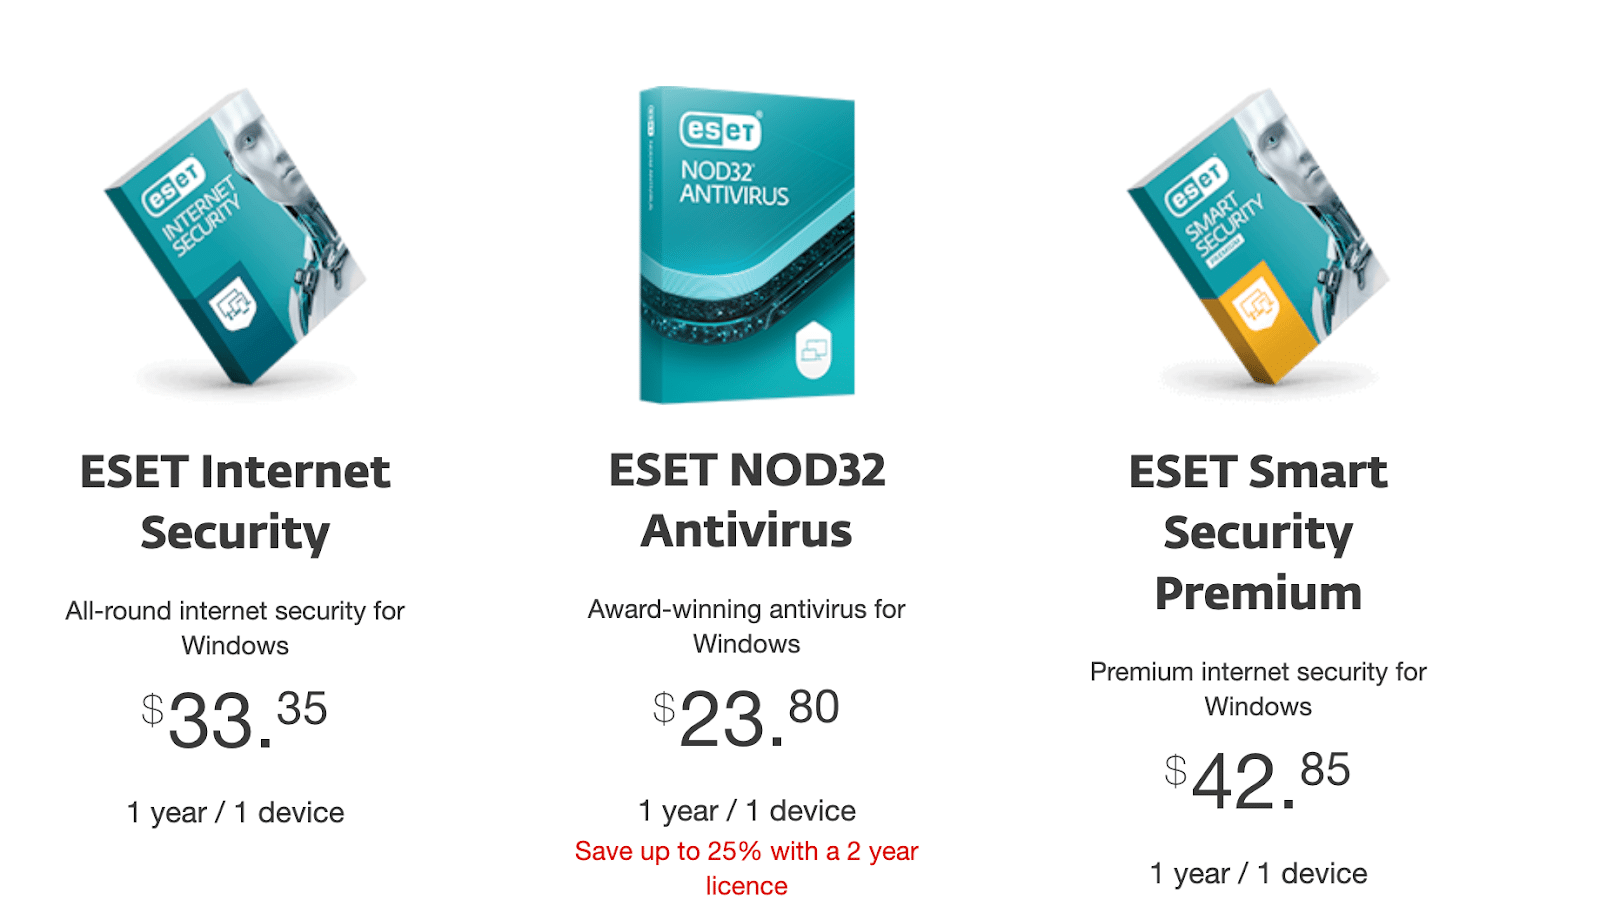 ESET Smart Security Pricing